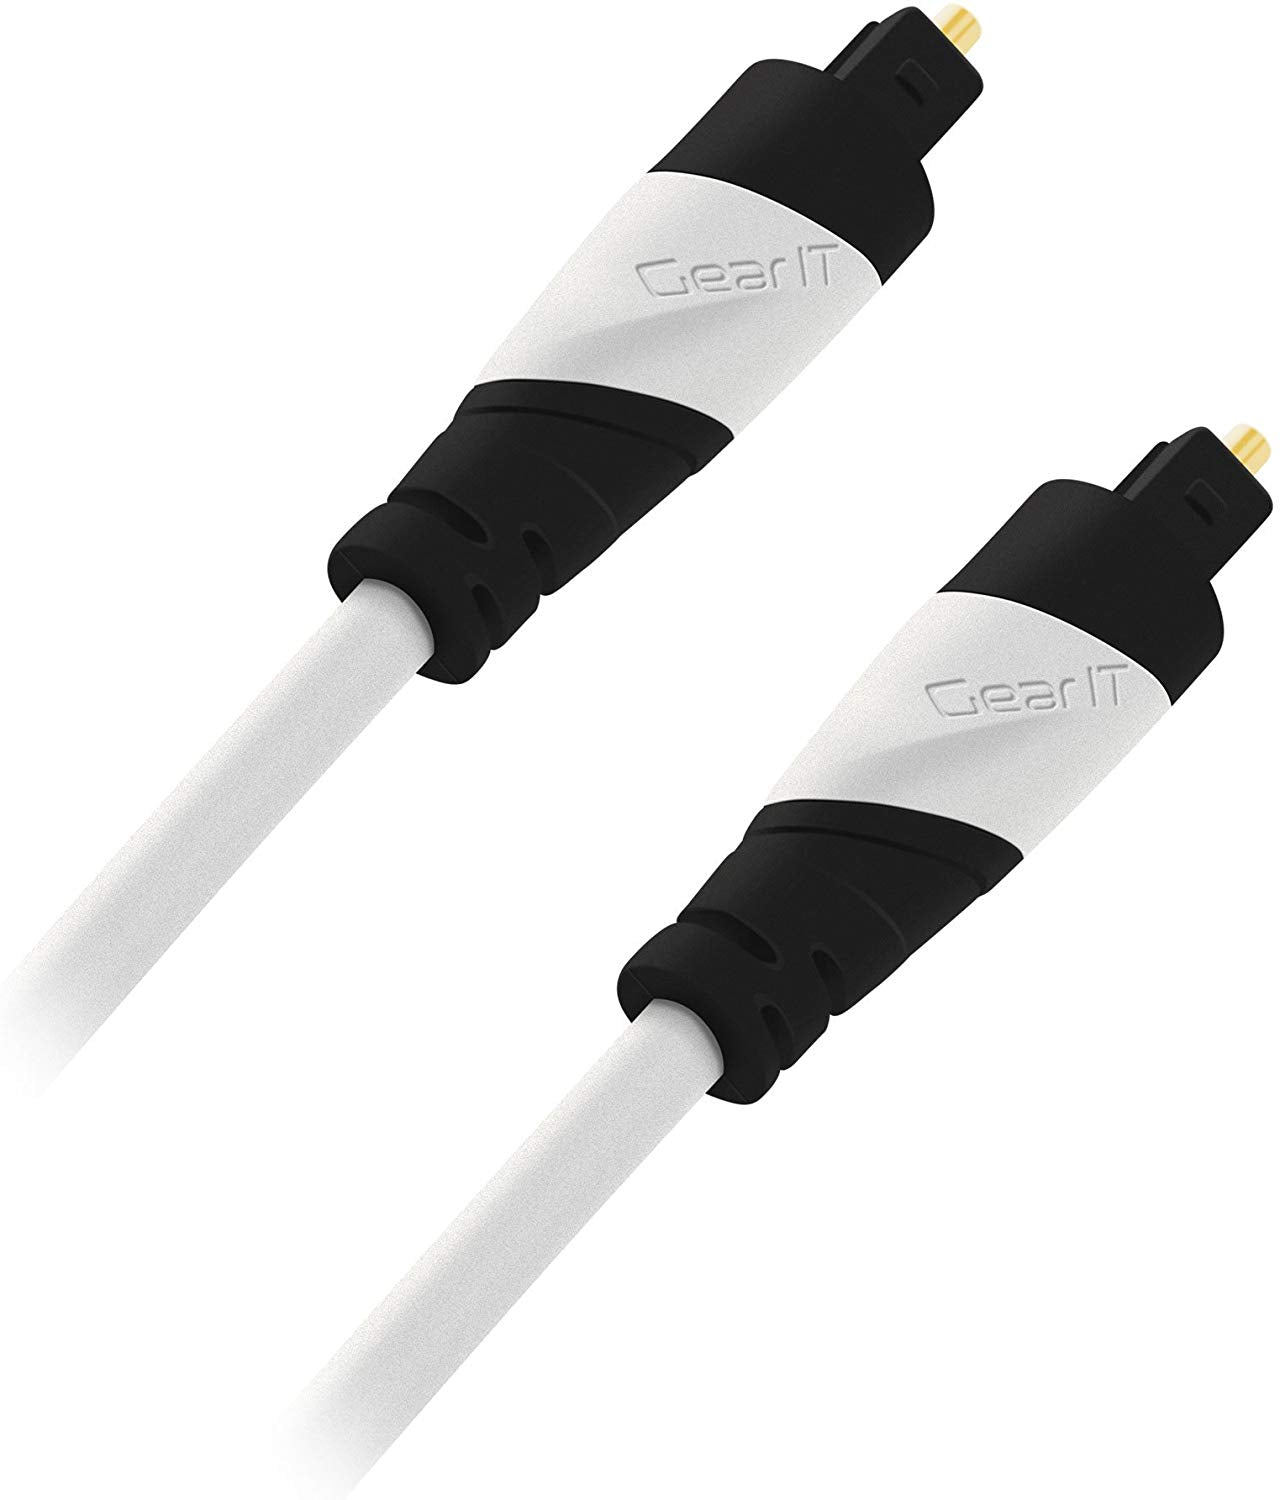 GearIT Toslink Digital Optical Audio Cable, White